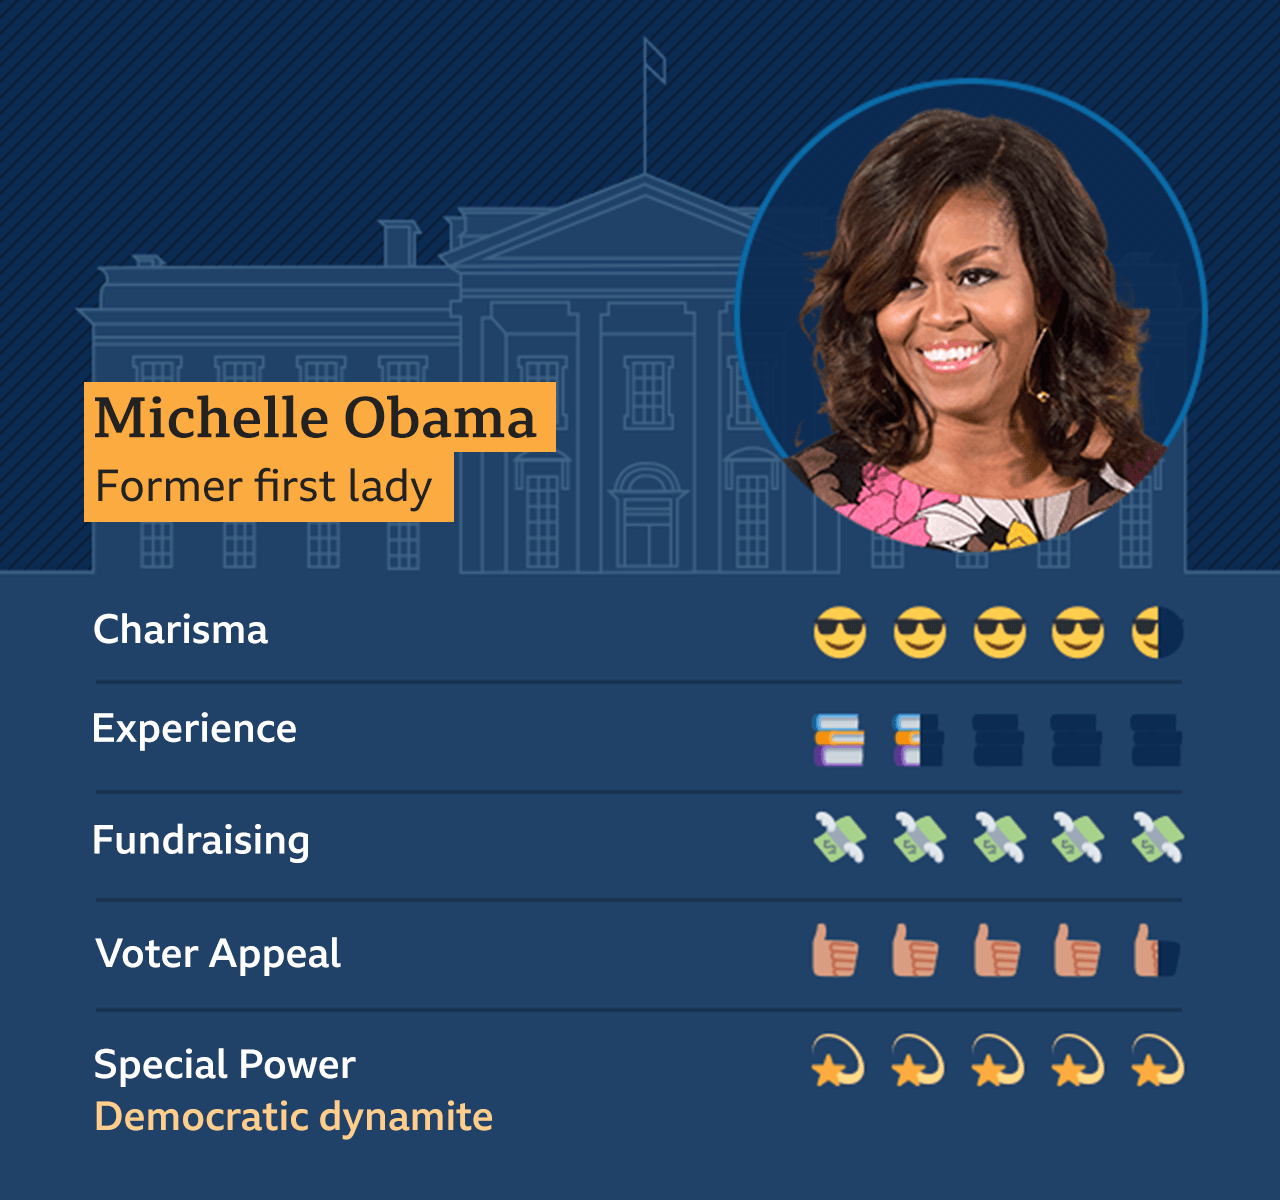 Graphic of Michelle Obama, former first lady: Charisma - 4.5, Experience - 1.5, Fundraising - 5, Voter appeal - 4.5, Special Power - Democratic dynamite - 5